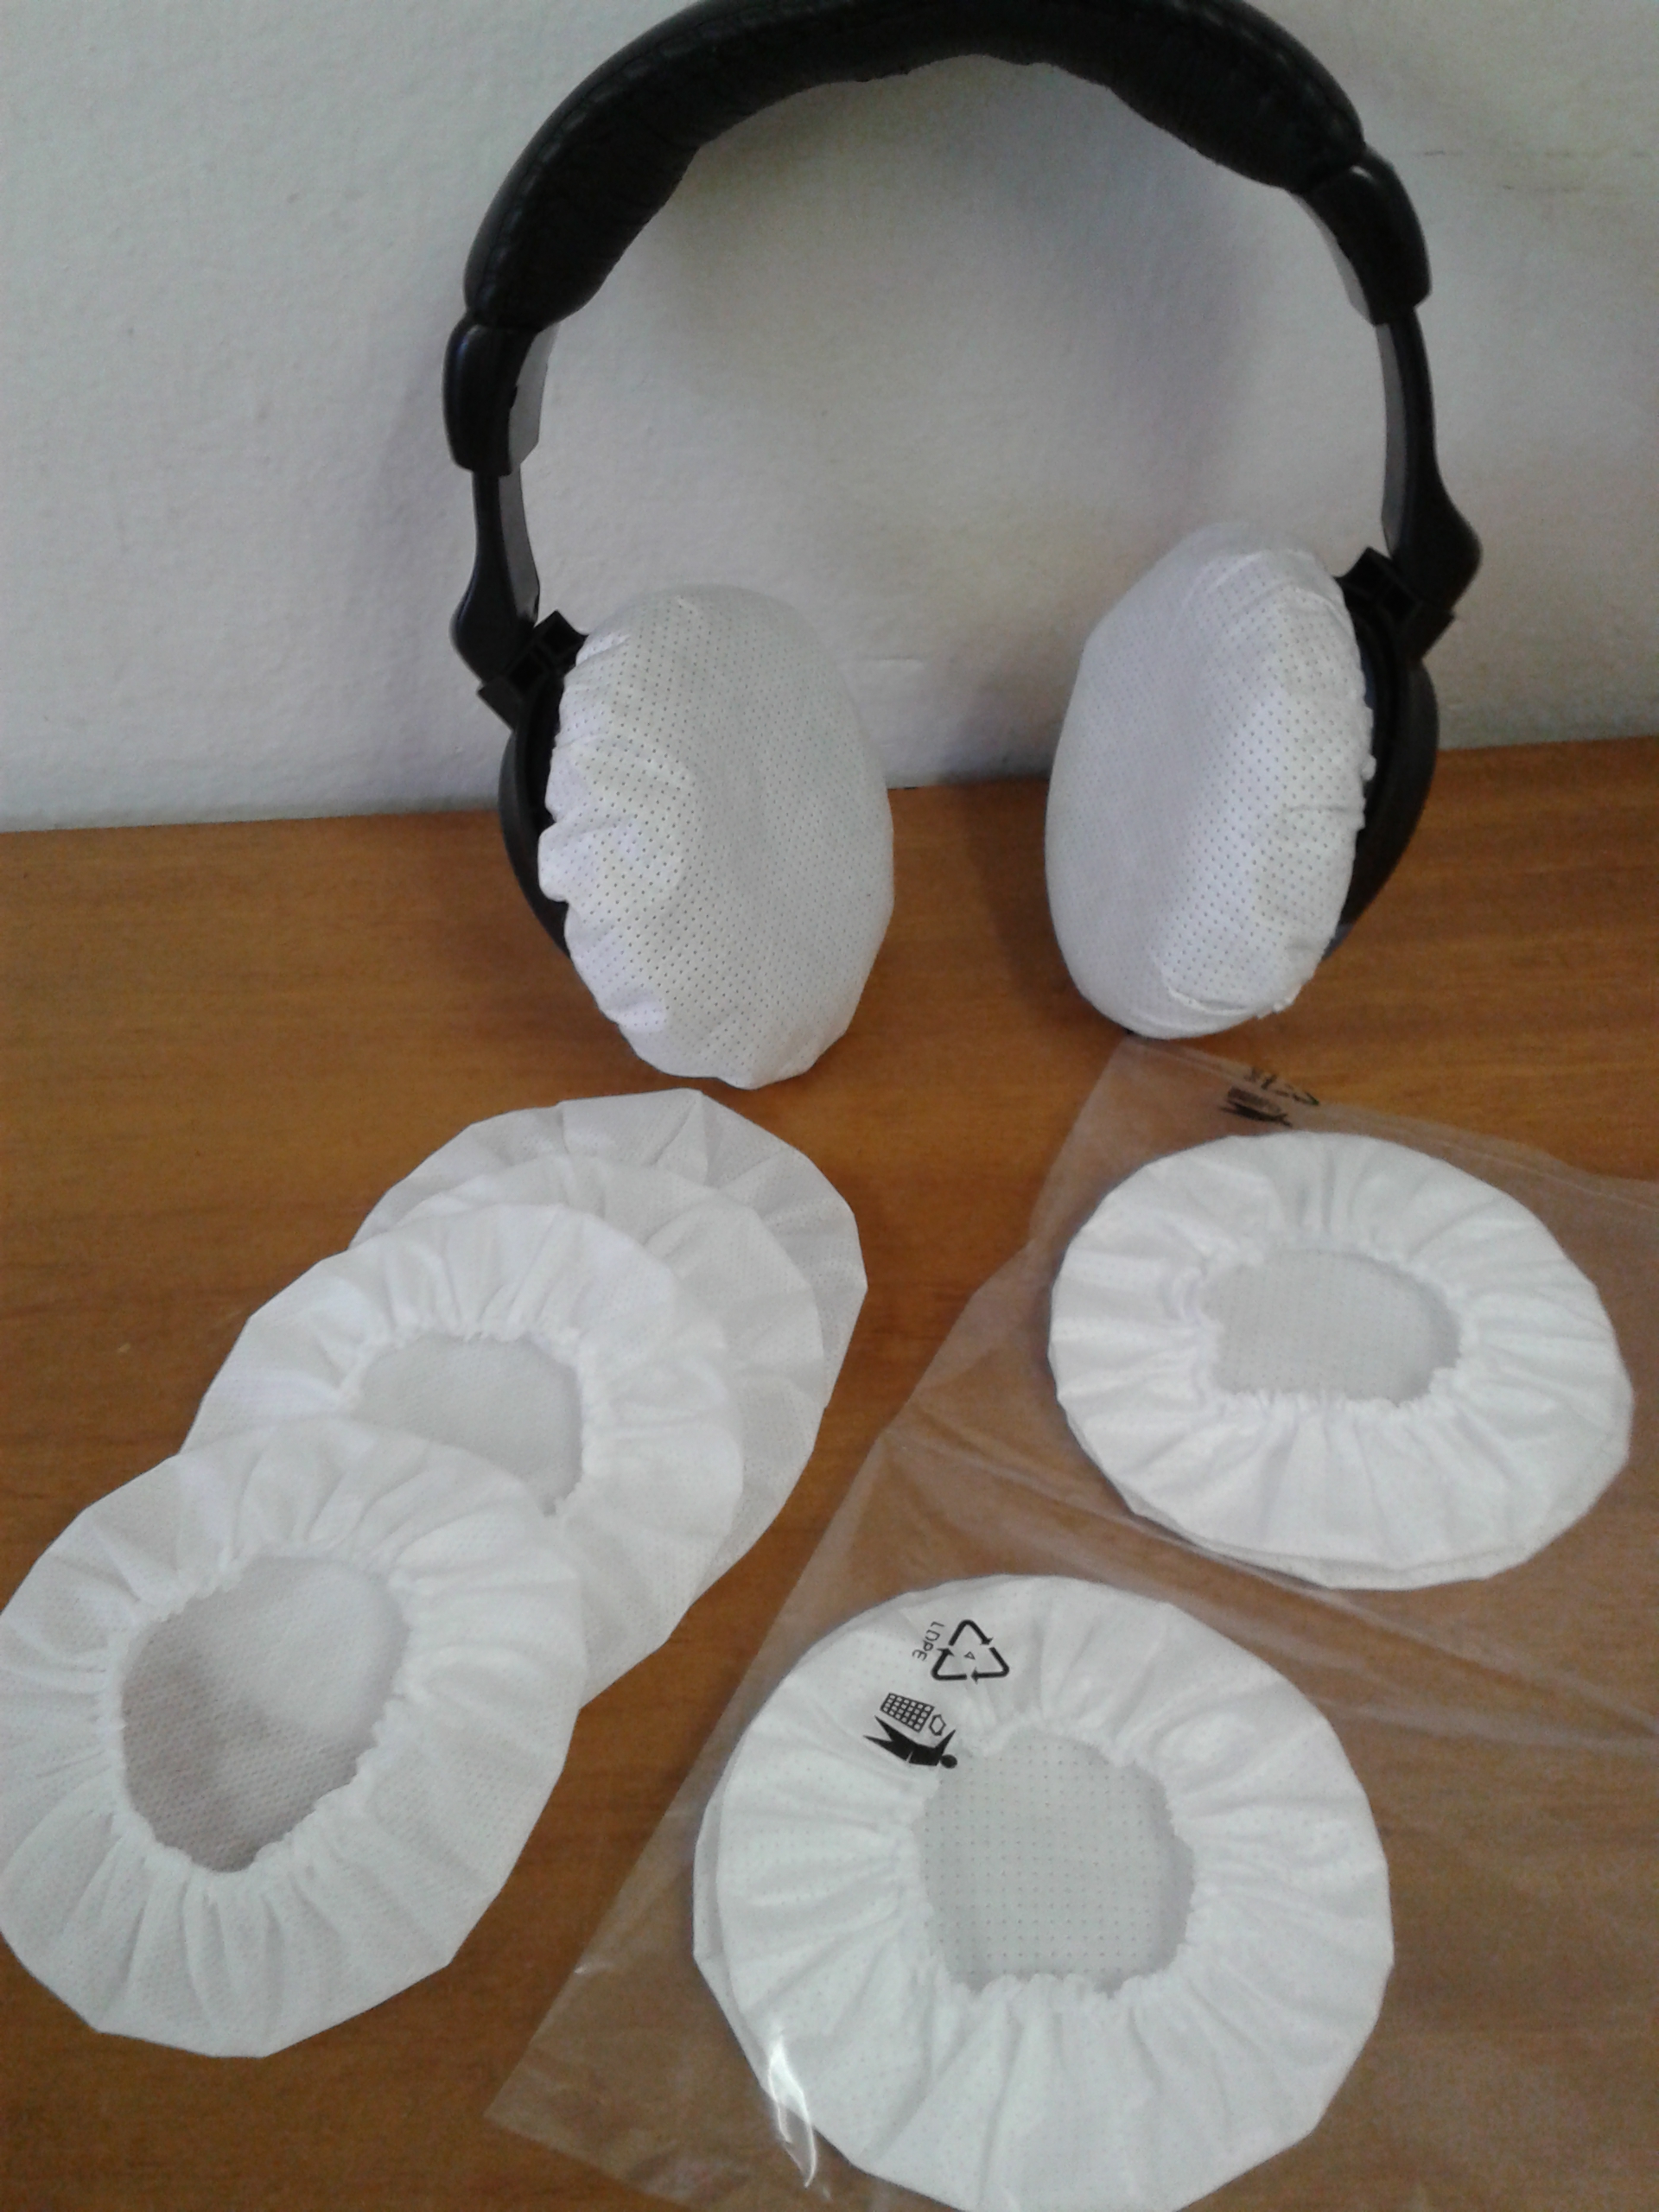 Sanitary pads on disposable headphones